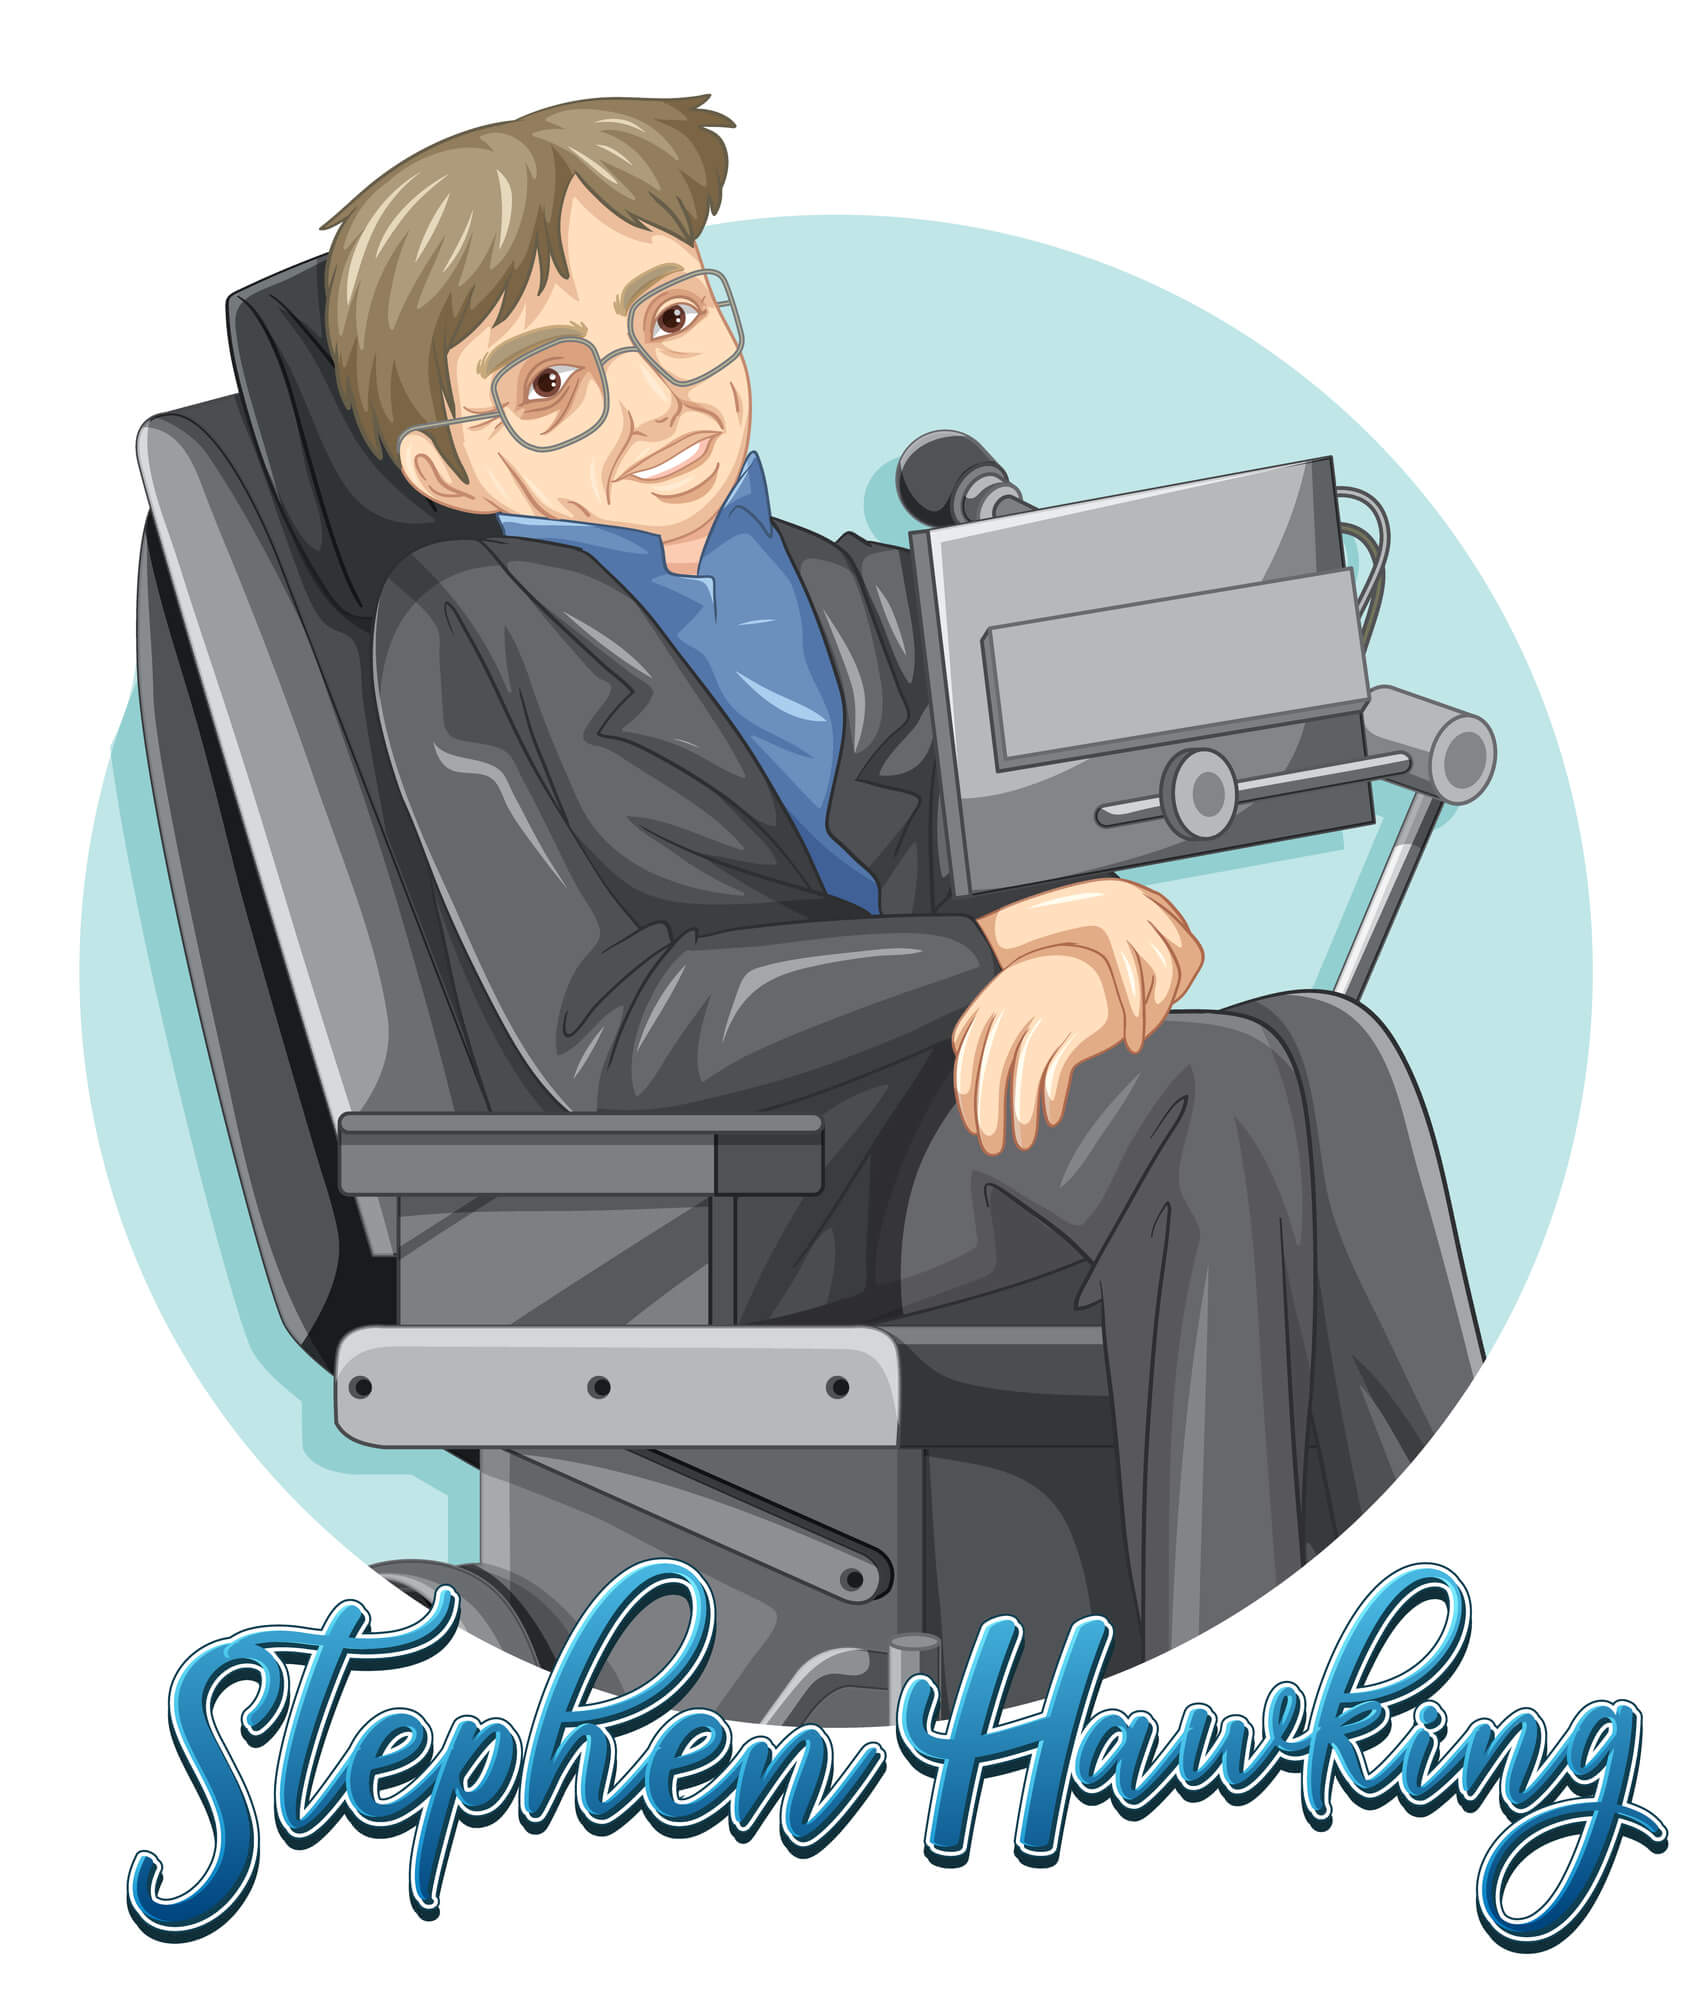 Prof. Stephen Hawking and the computer he used for his mouth. Illustration: depositphotos.com